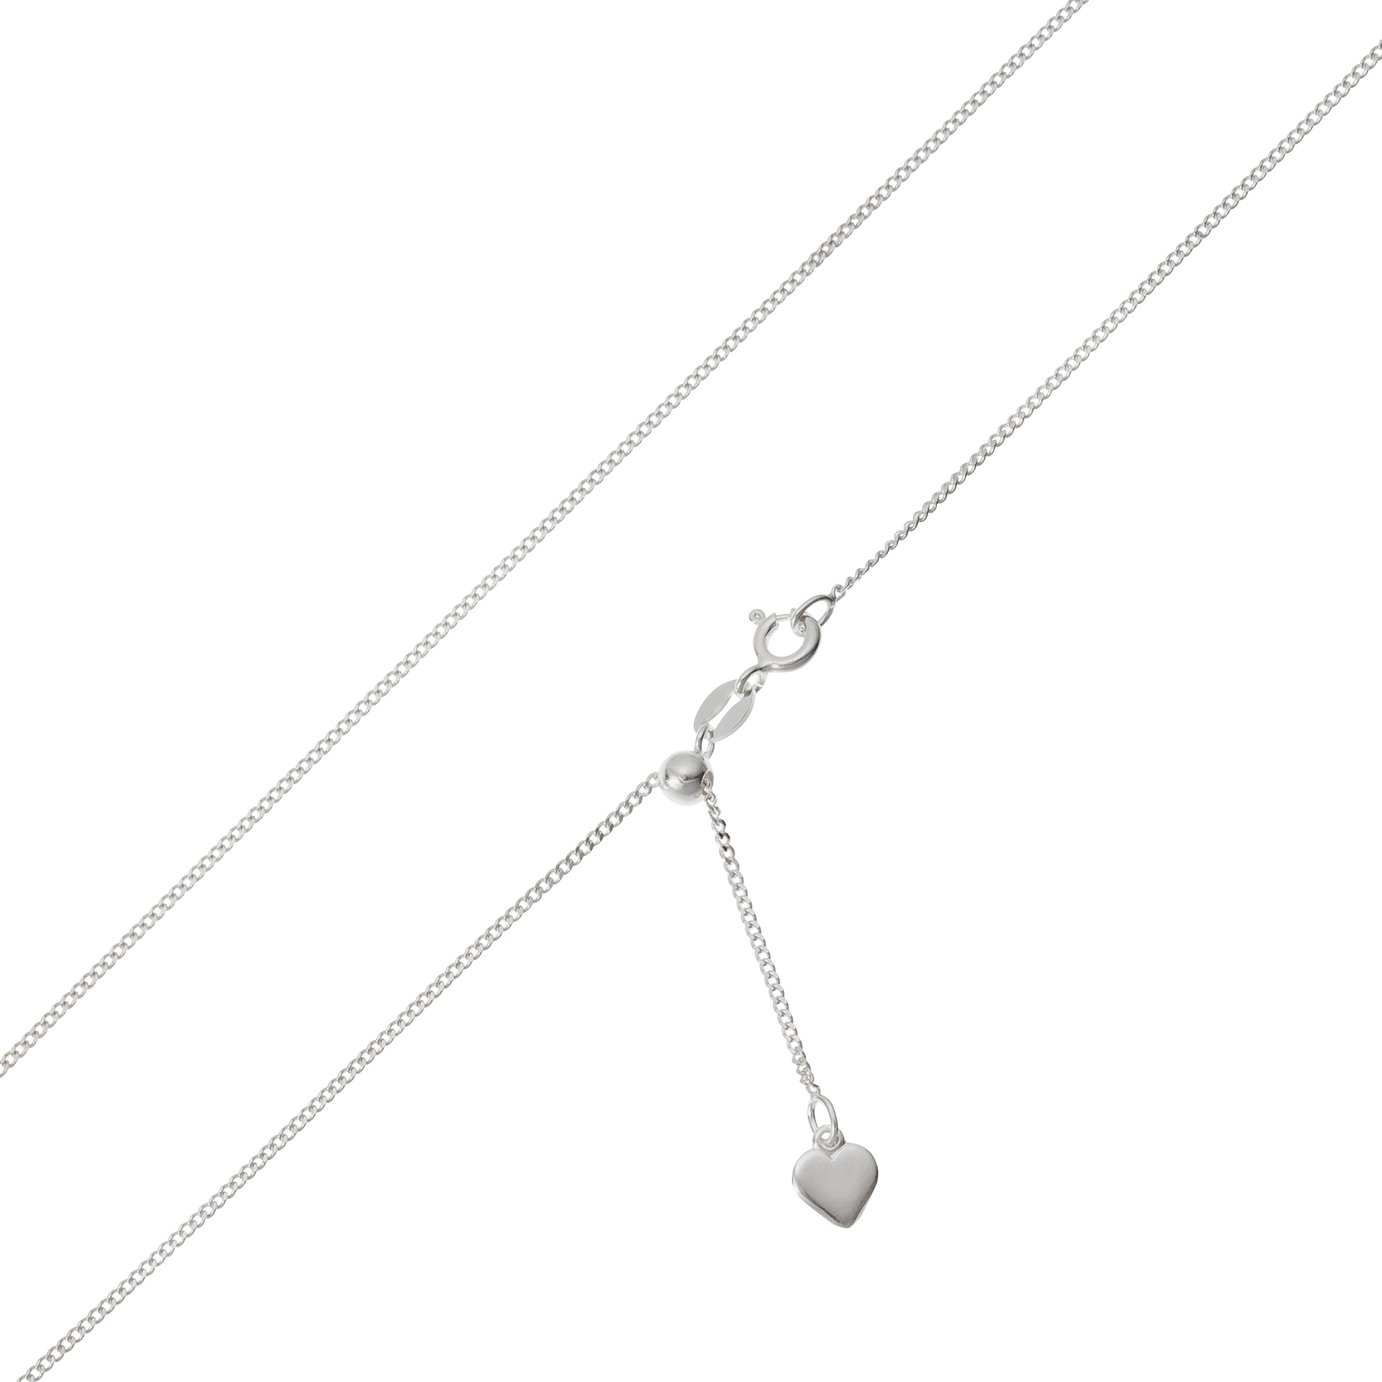 Revere Silver Adjustable Length Fine Curb 22 Inch Necklace